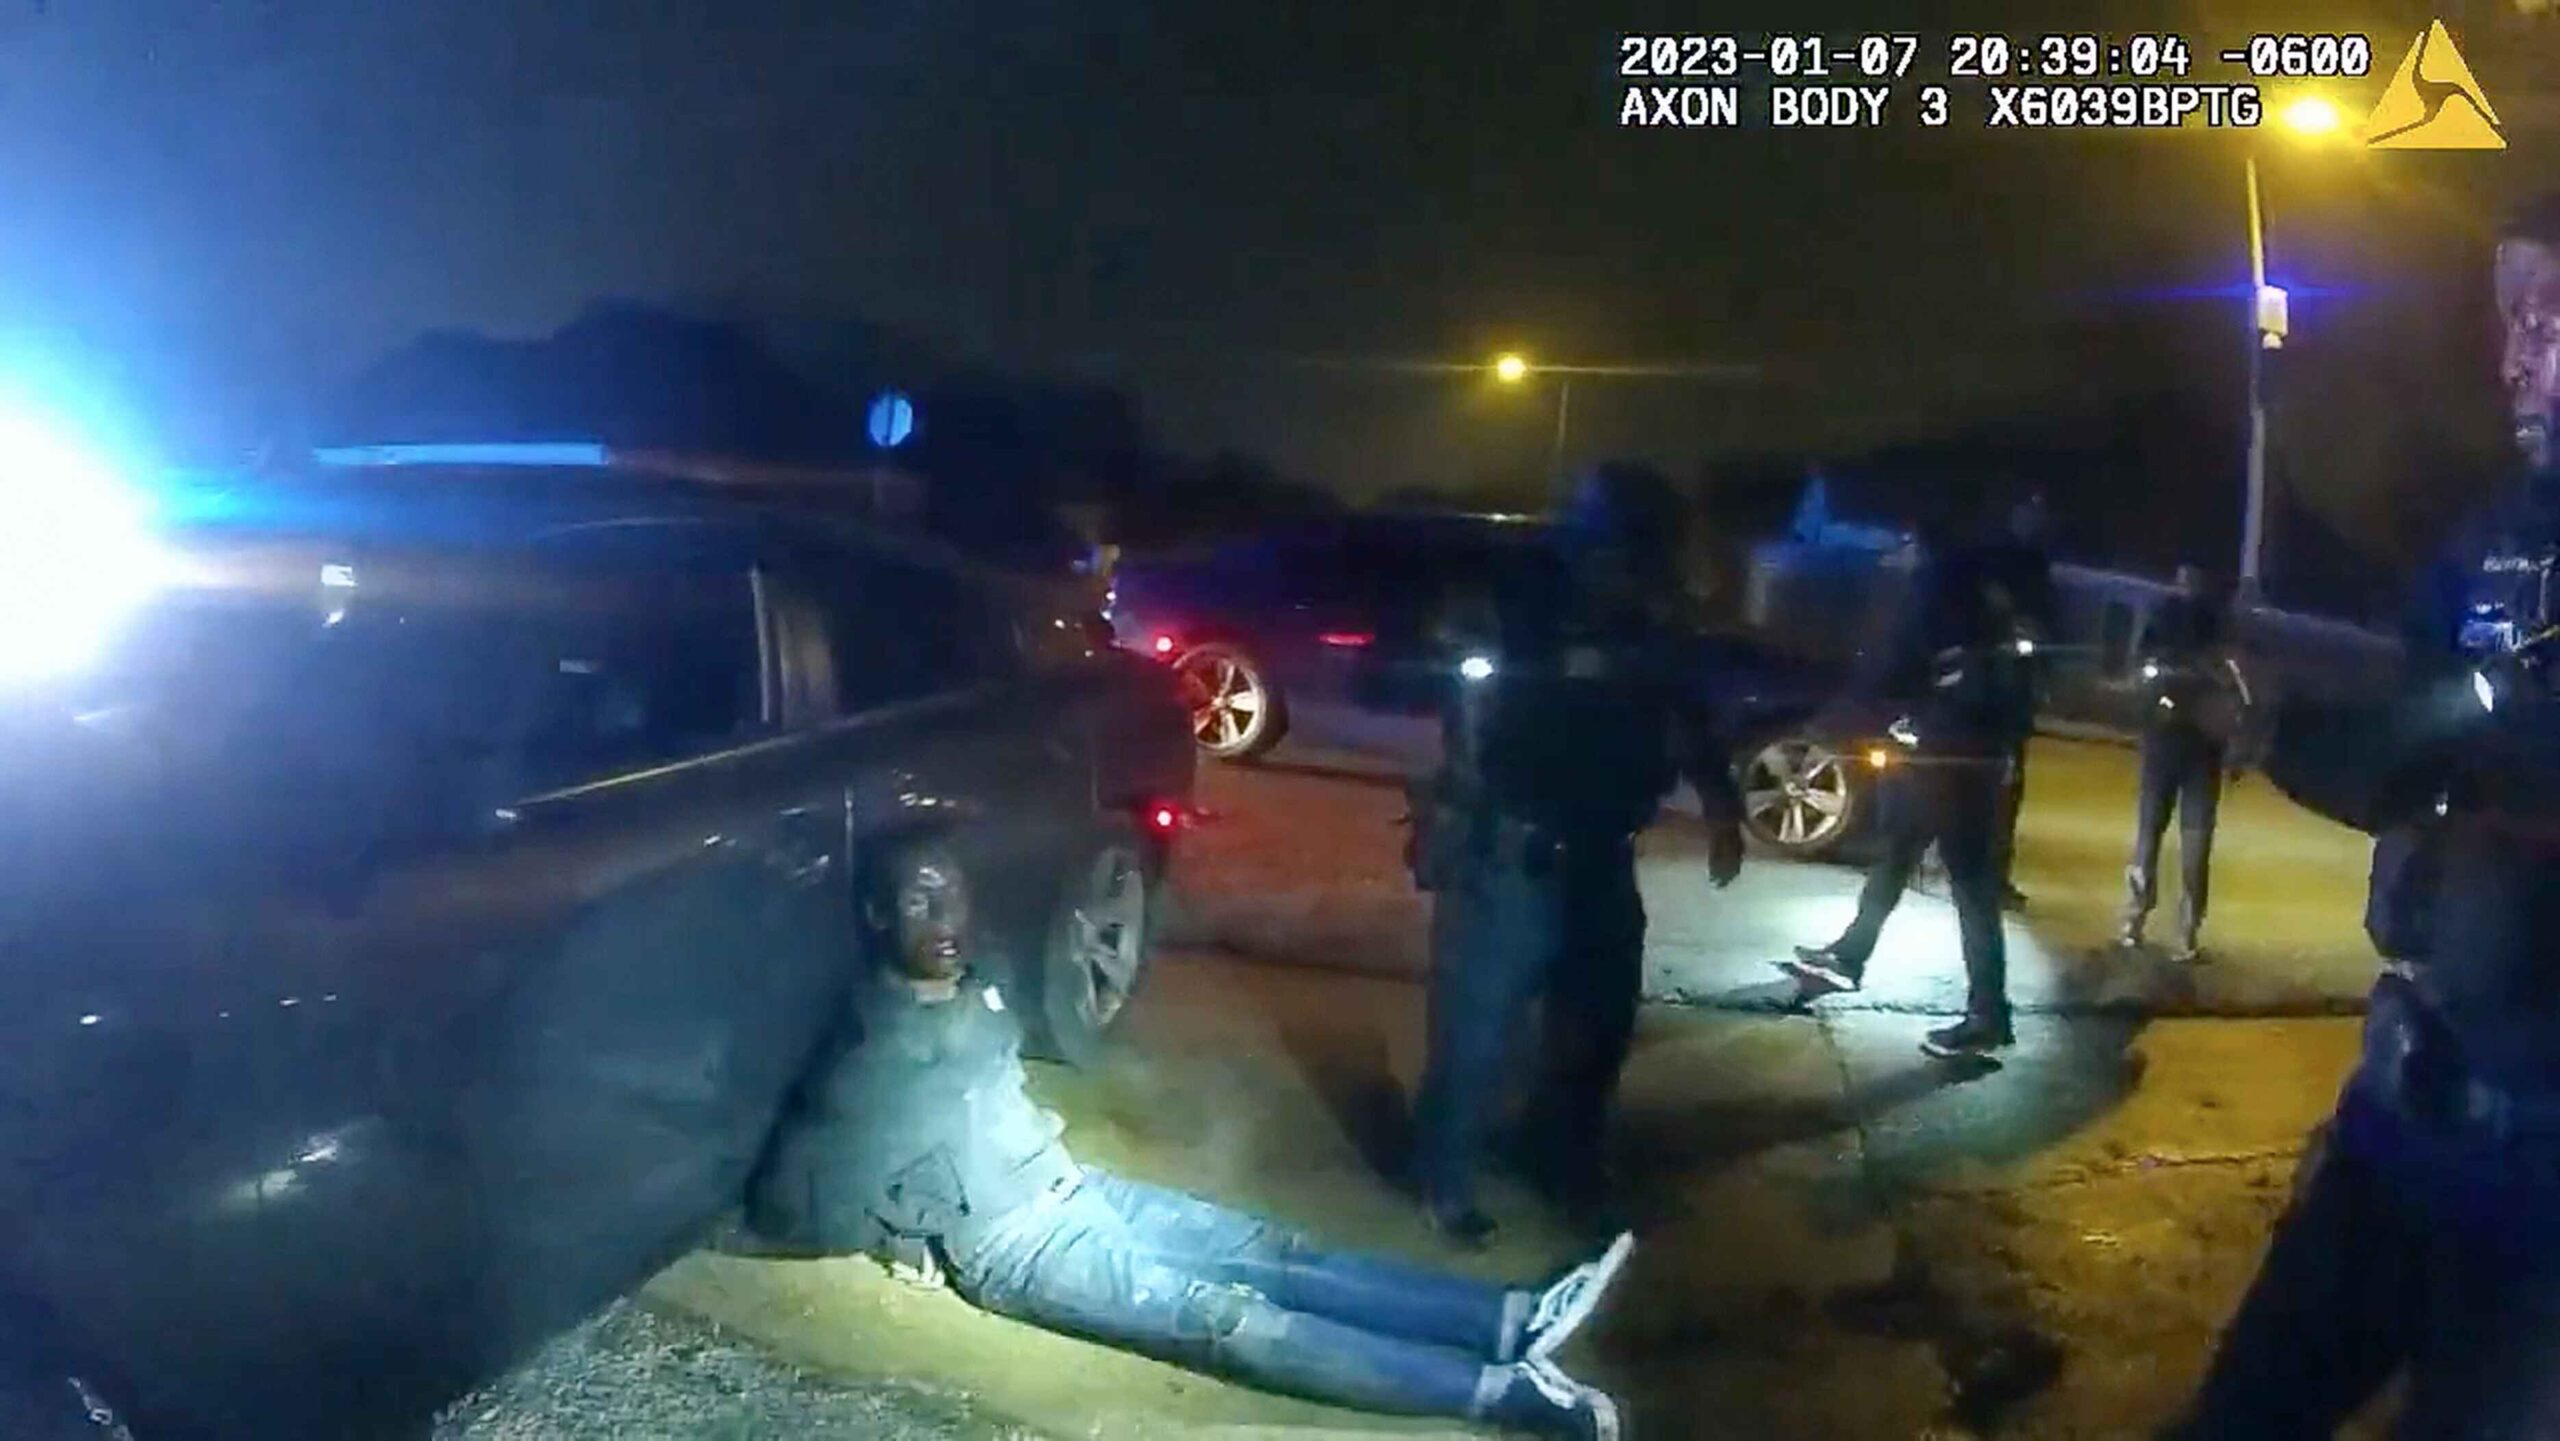 A grand jury indicted five former Memphis police officers for obstruction and civil rights violations in connection with the beating death of Tyre Nichols. (City of Memphis via AP, File)